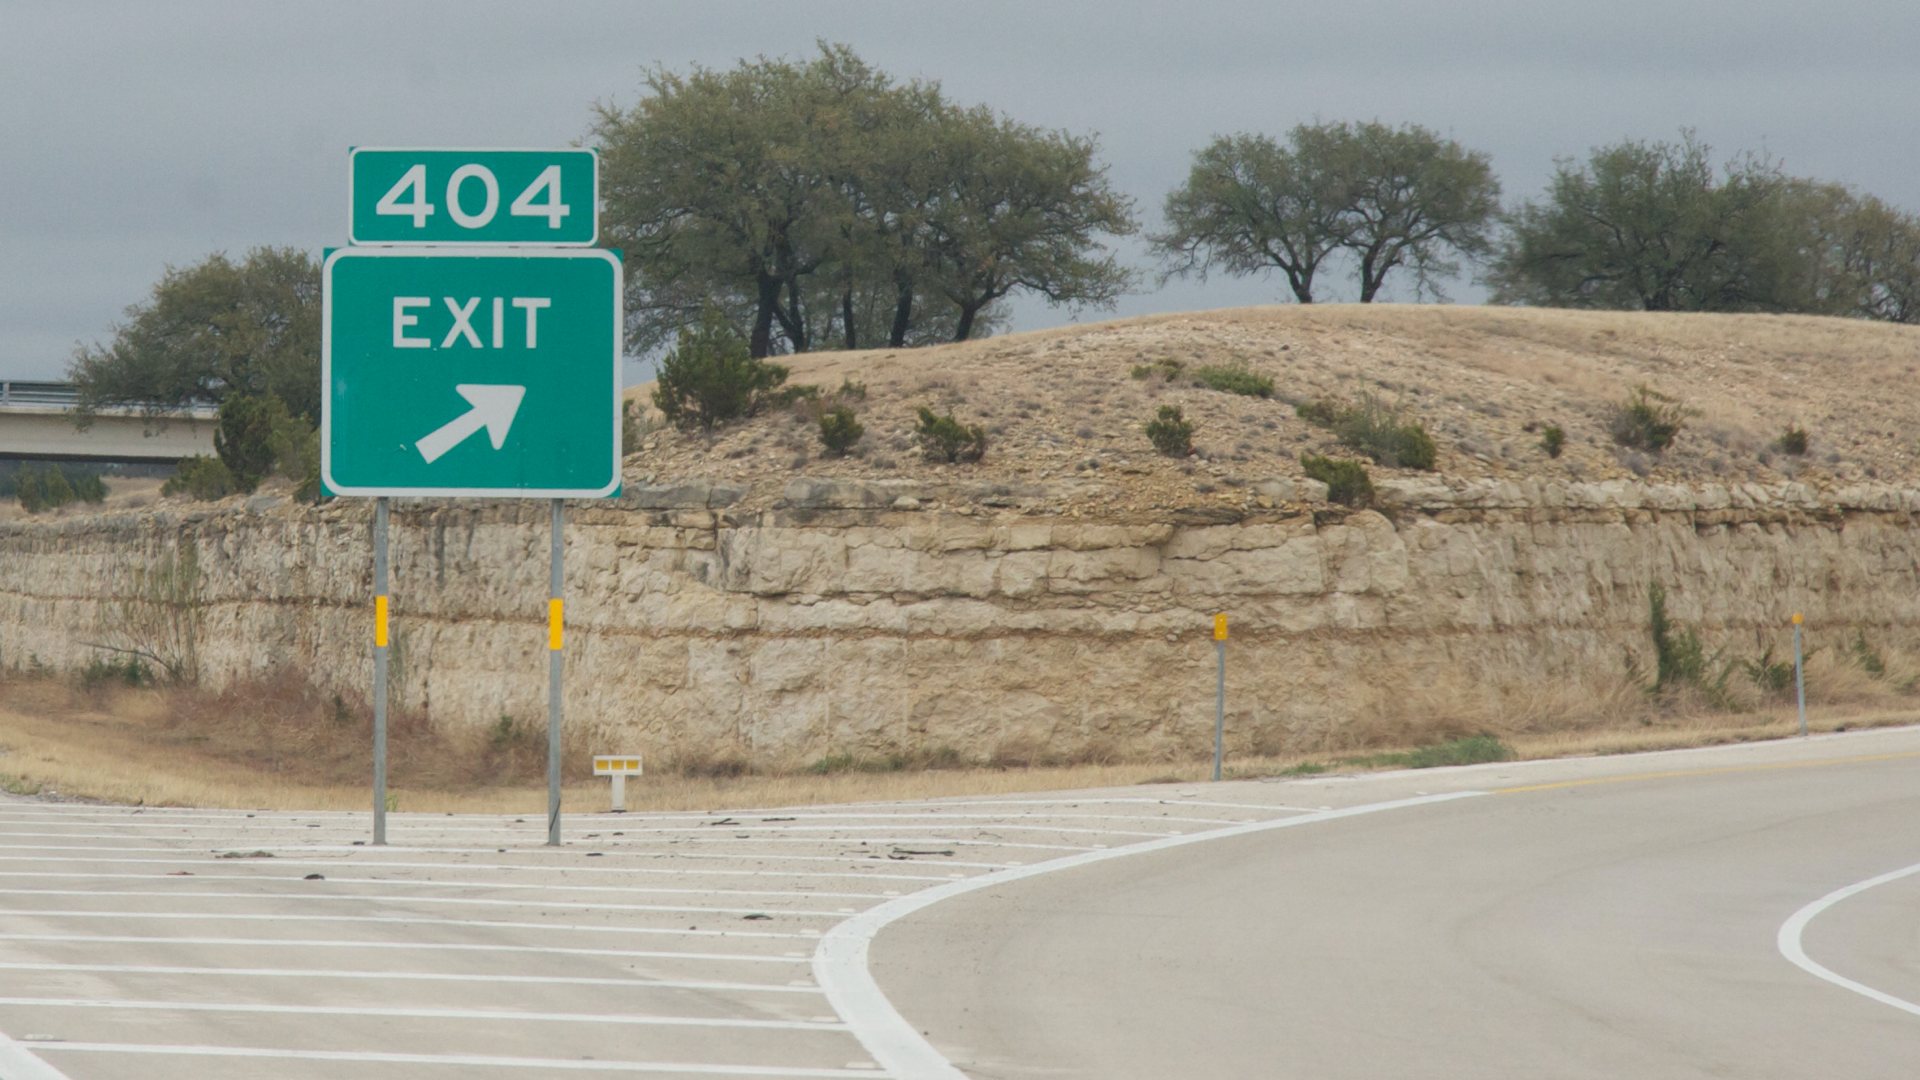 Sign for Exit 404 on an American highway.